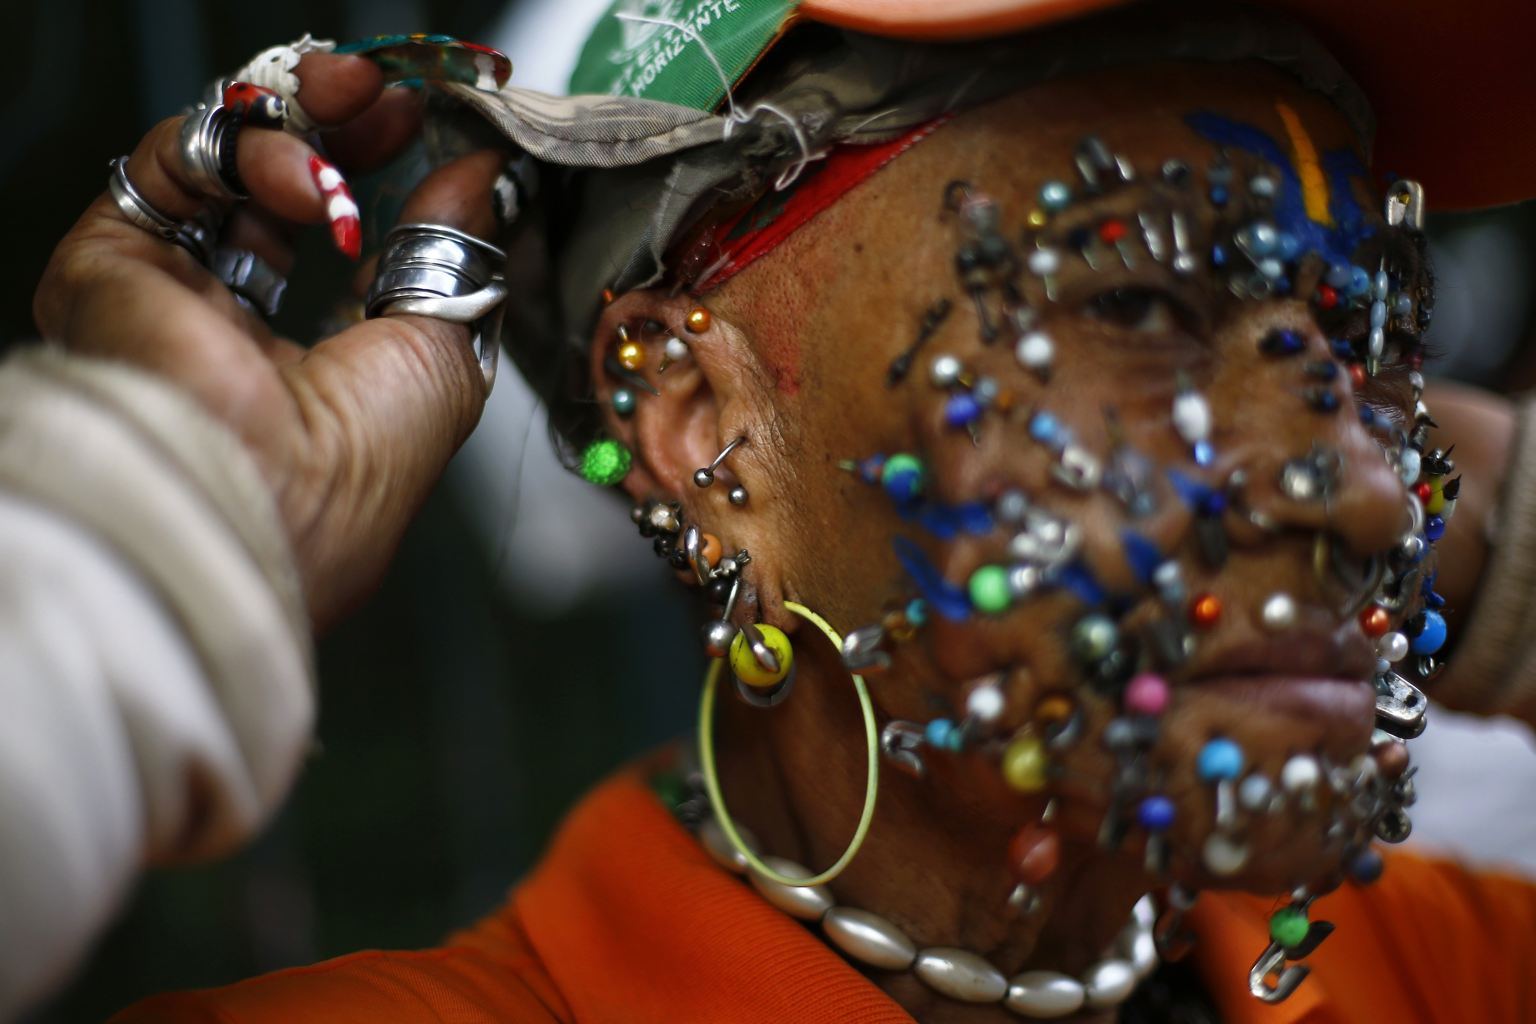 A street cleaner and fan of the Brazilian national World Cup soccer team shows the myriad of piercings on her face on a street in Belo Horizonte, July 3, 2014.